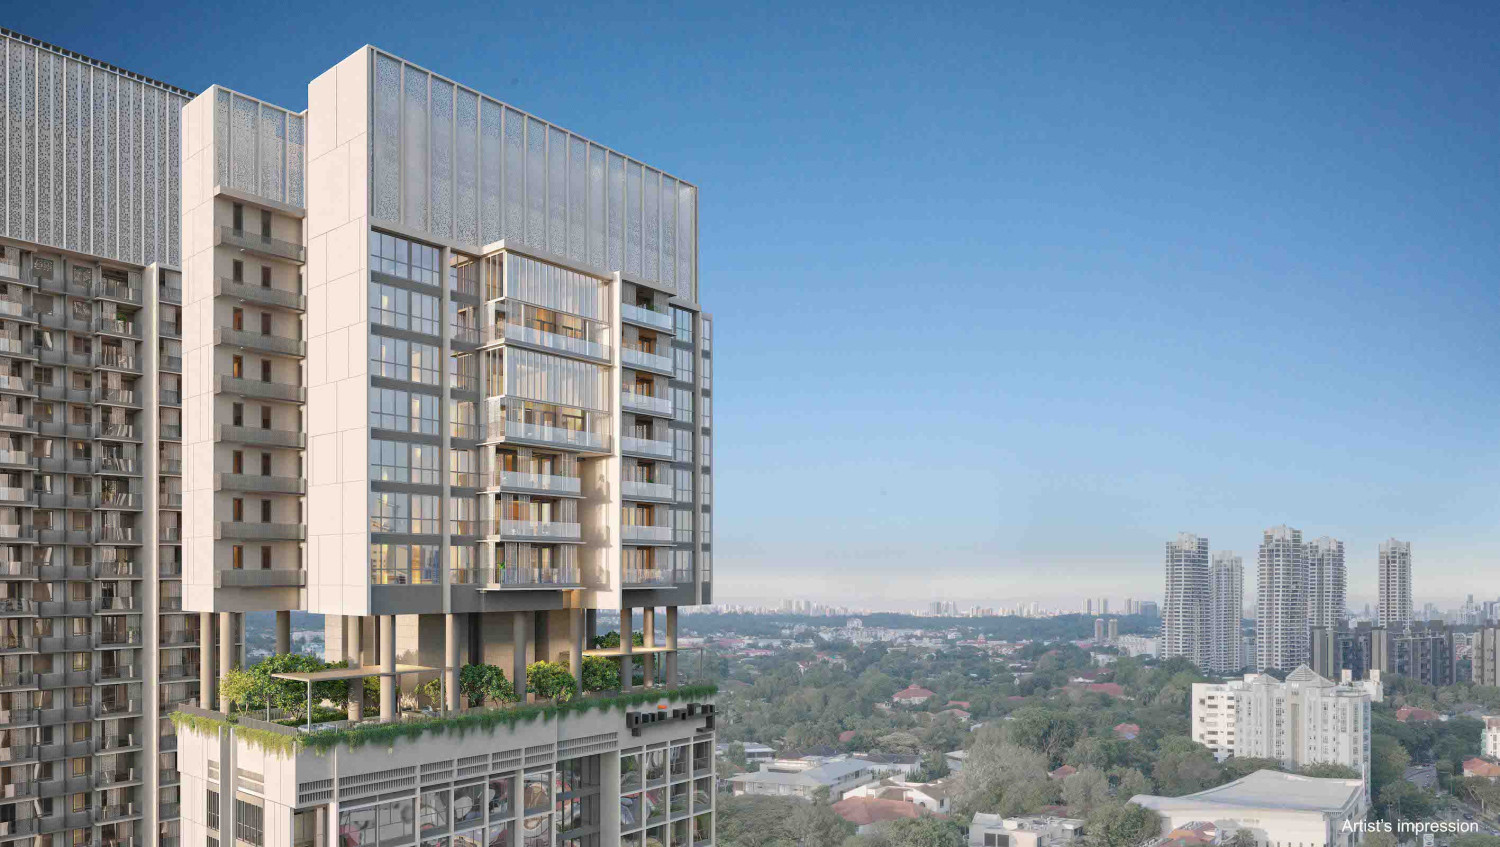 One Holland Village: Mixed-use, luxury living in a coveted area - Property News